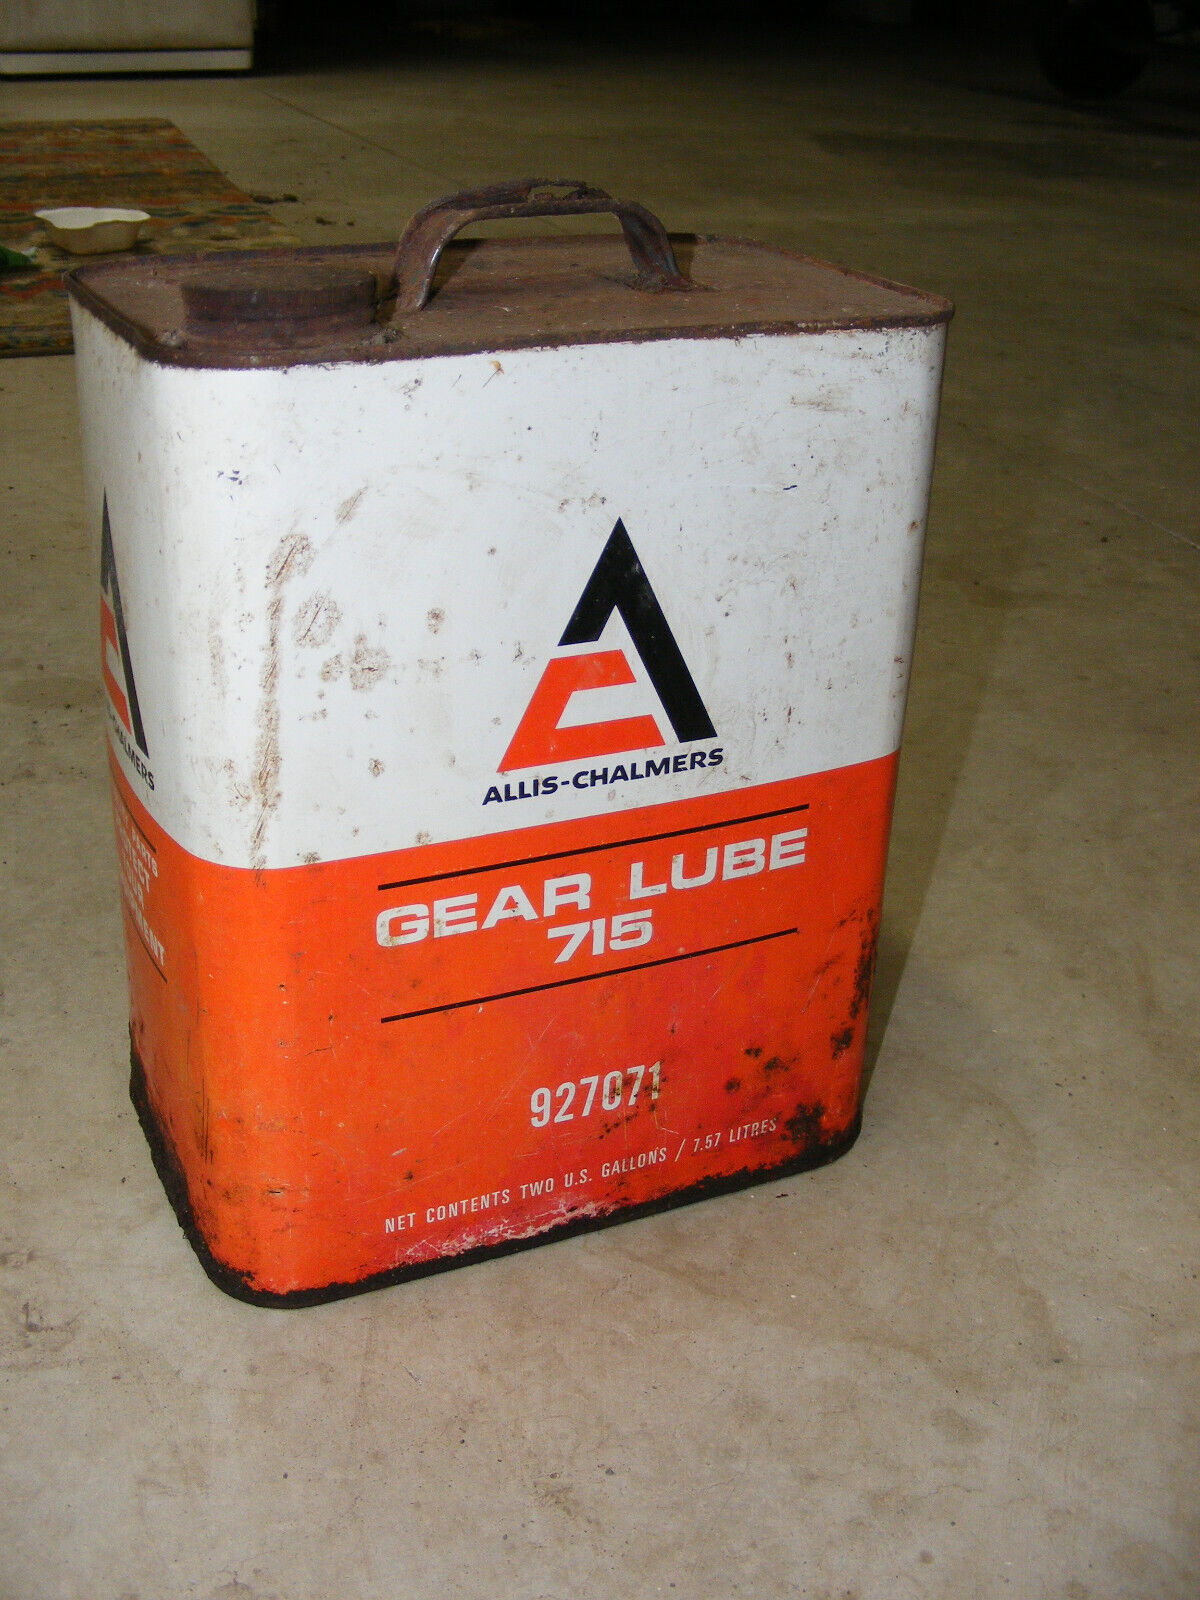 VINTAGE ALLIS-CHALMERS Gear Lube 715 2 GALLONS OIL CAN 927071